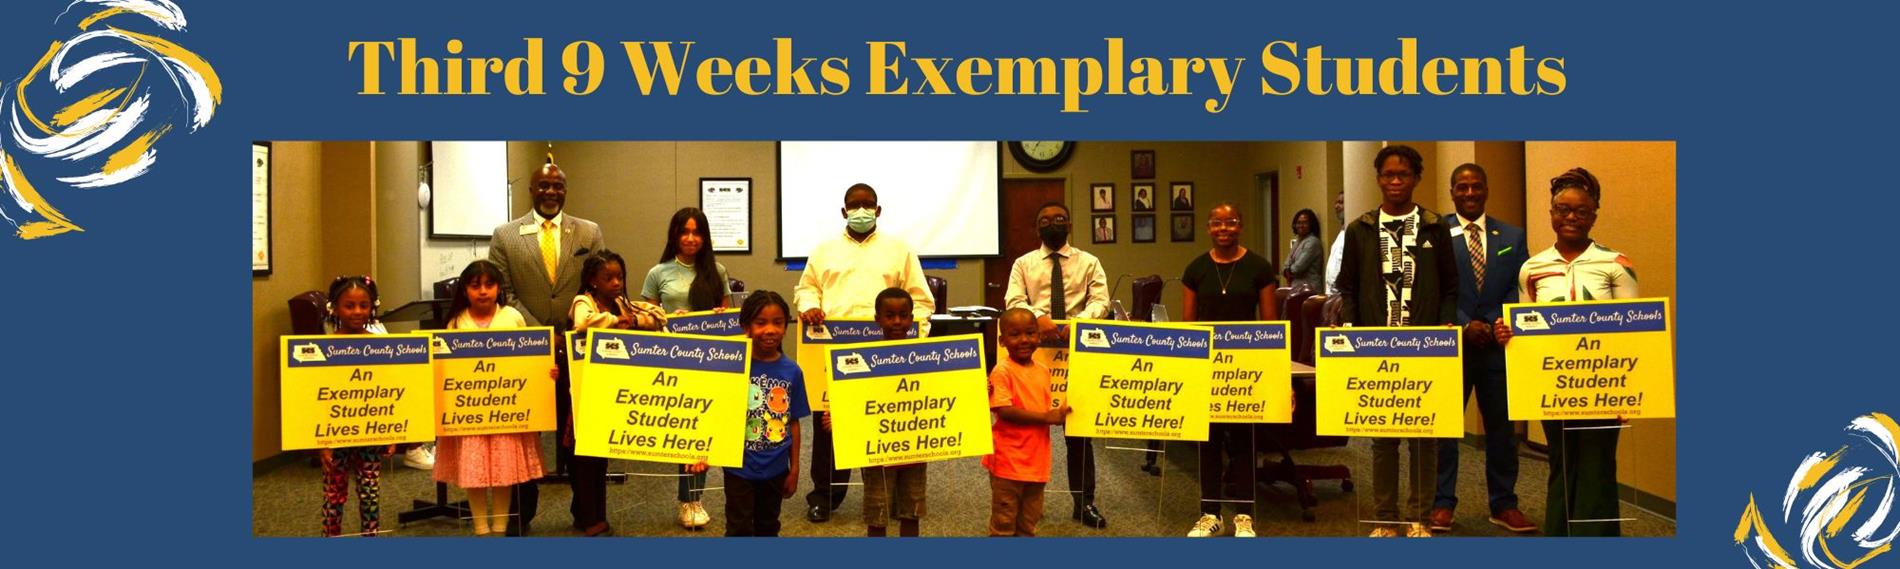 Third 9 Weeks Exemplary Students